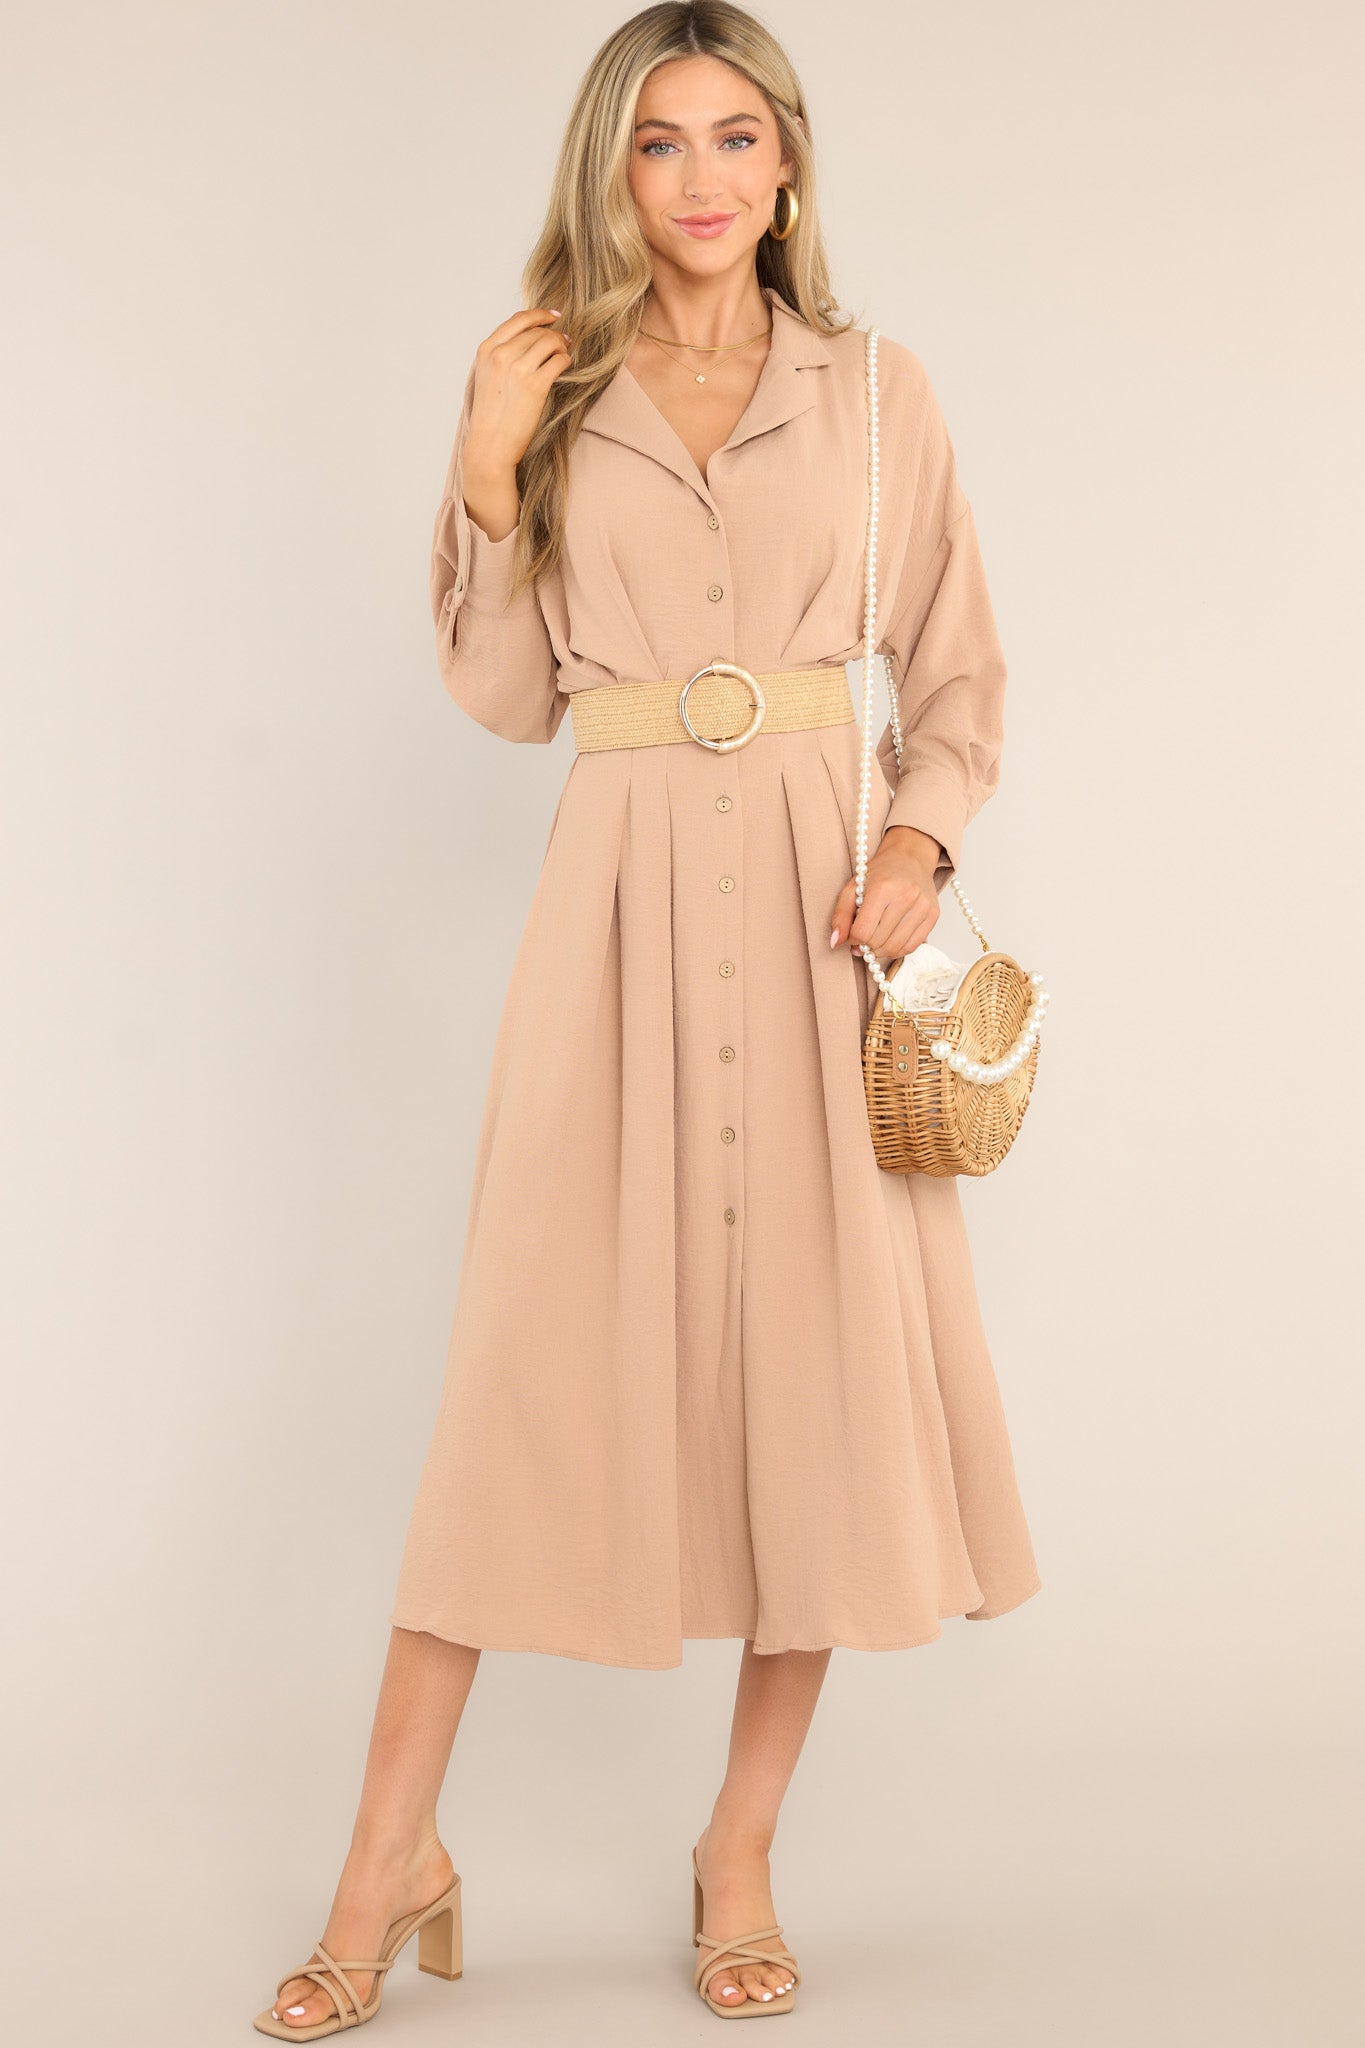 This beige midi dress features a collard neckline, functional buttons going down the front, long sleeves with button closures, and a pleated design at the waist.